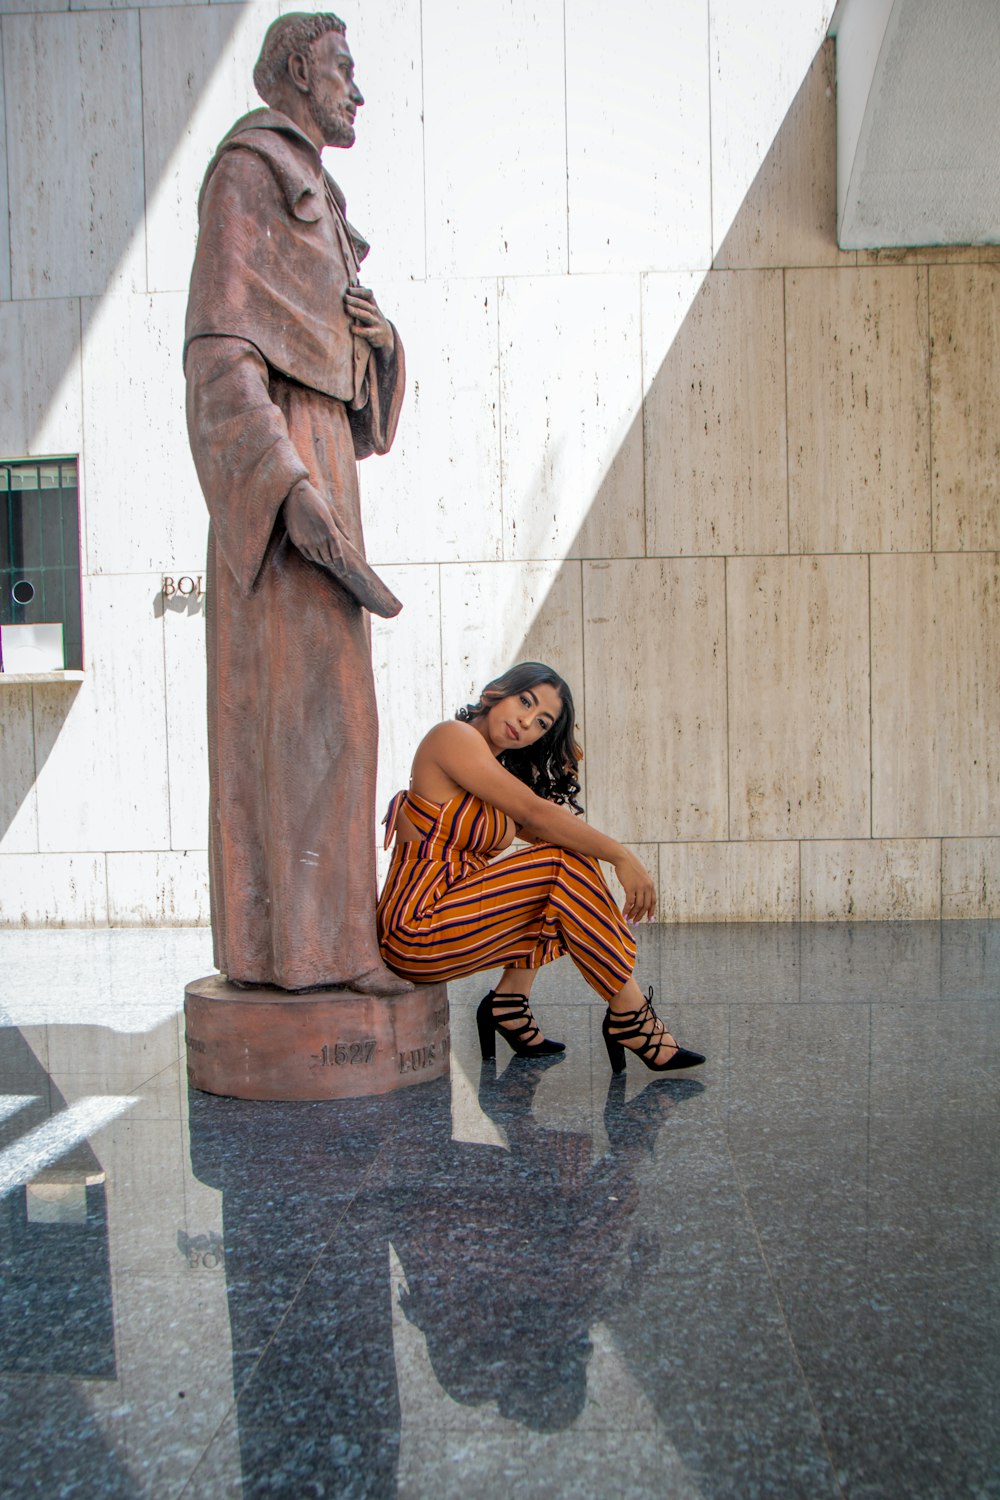 a woman sitting on the ground next to a statue